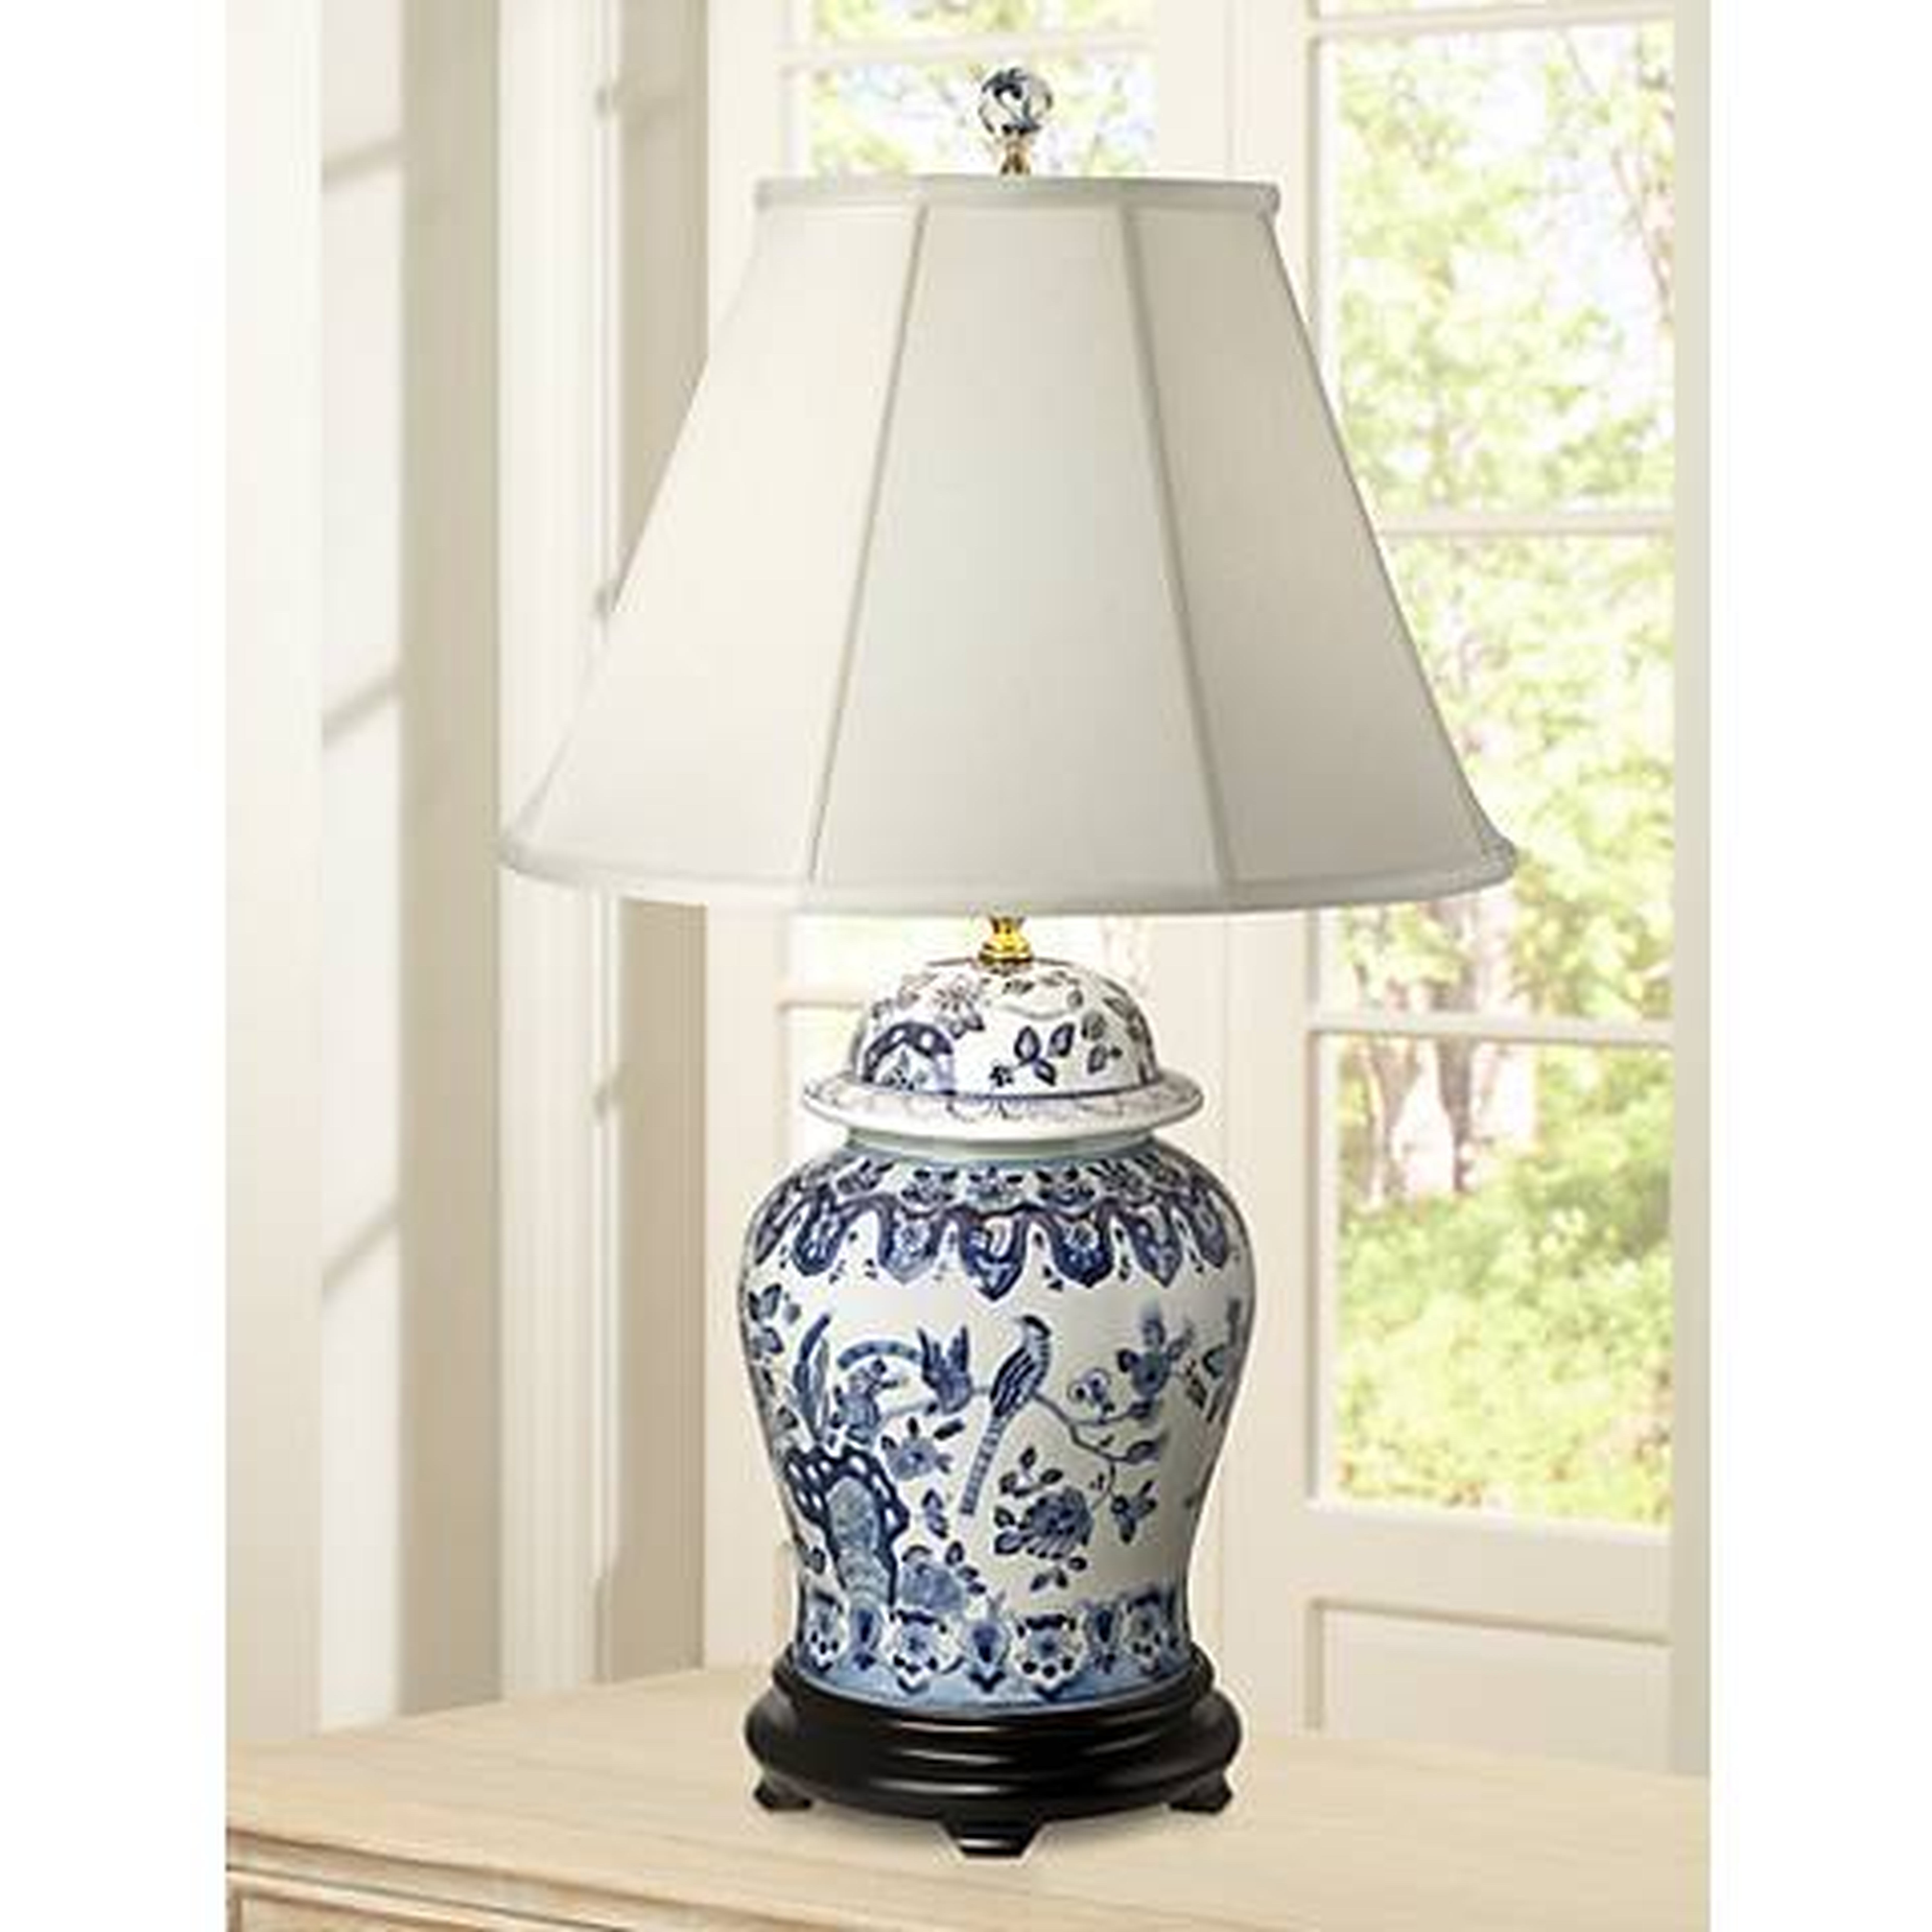 English Floral Hand-Painted Porcelain Ginger Jar Table Lamp - Lamps Plus